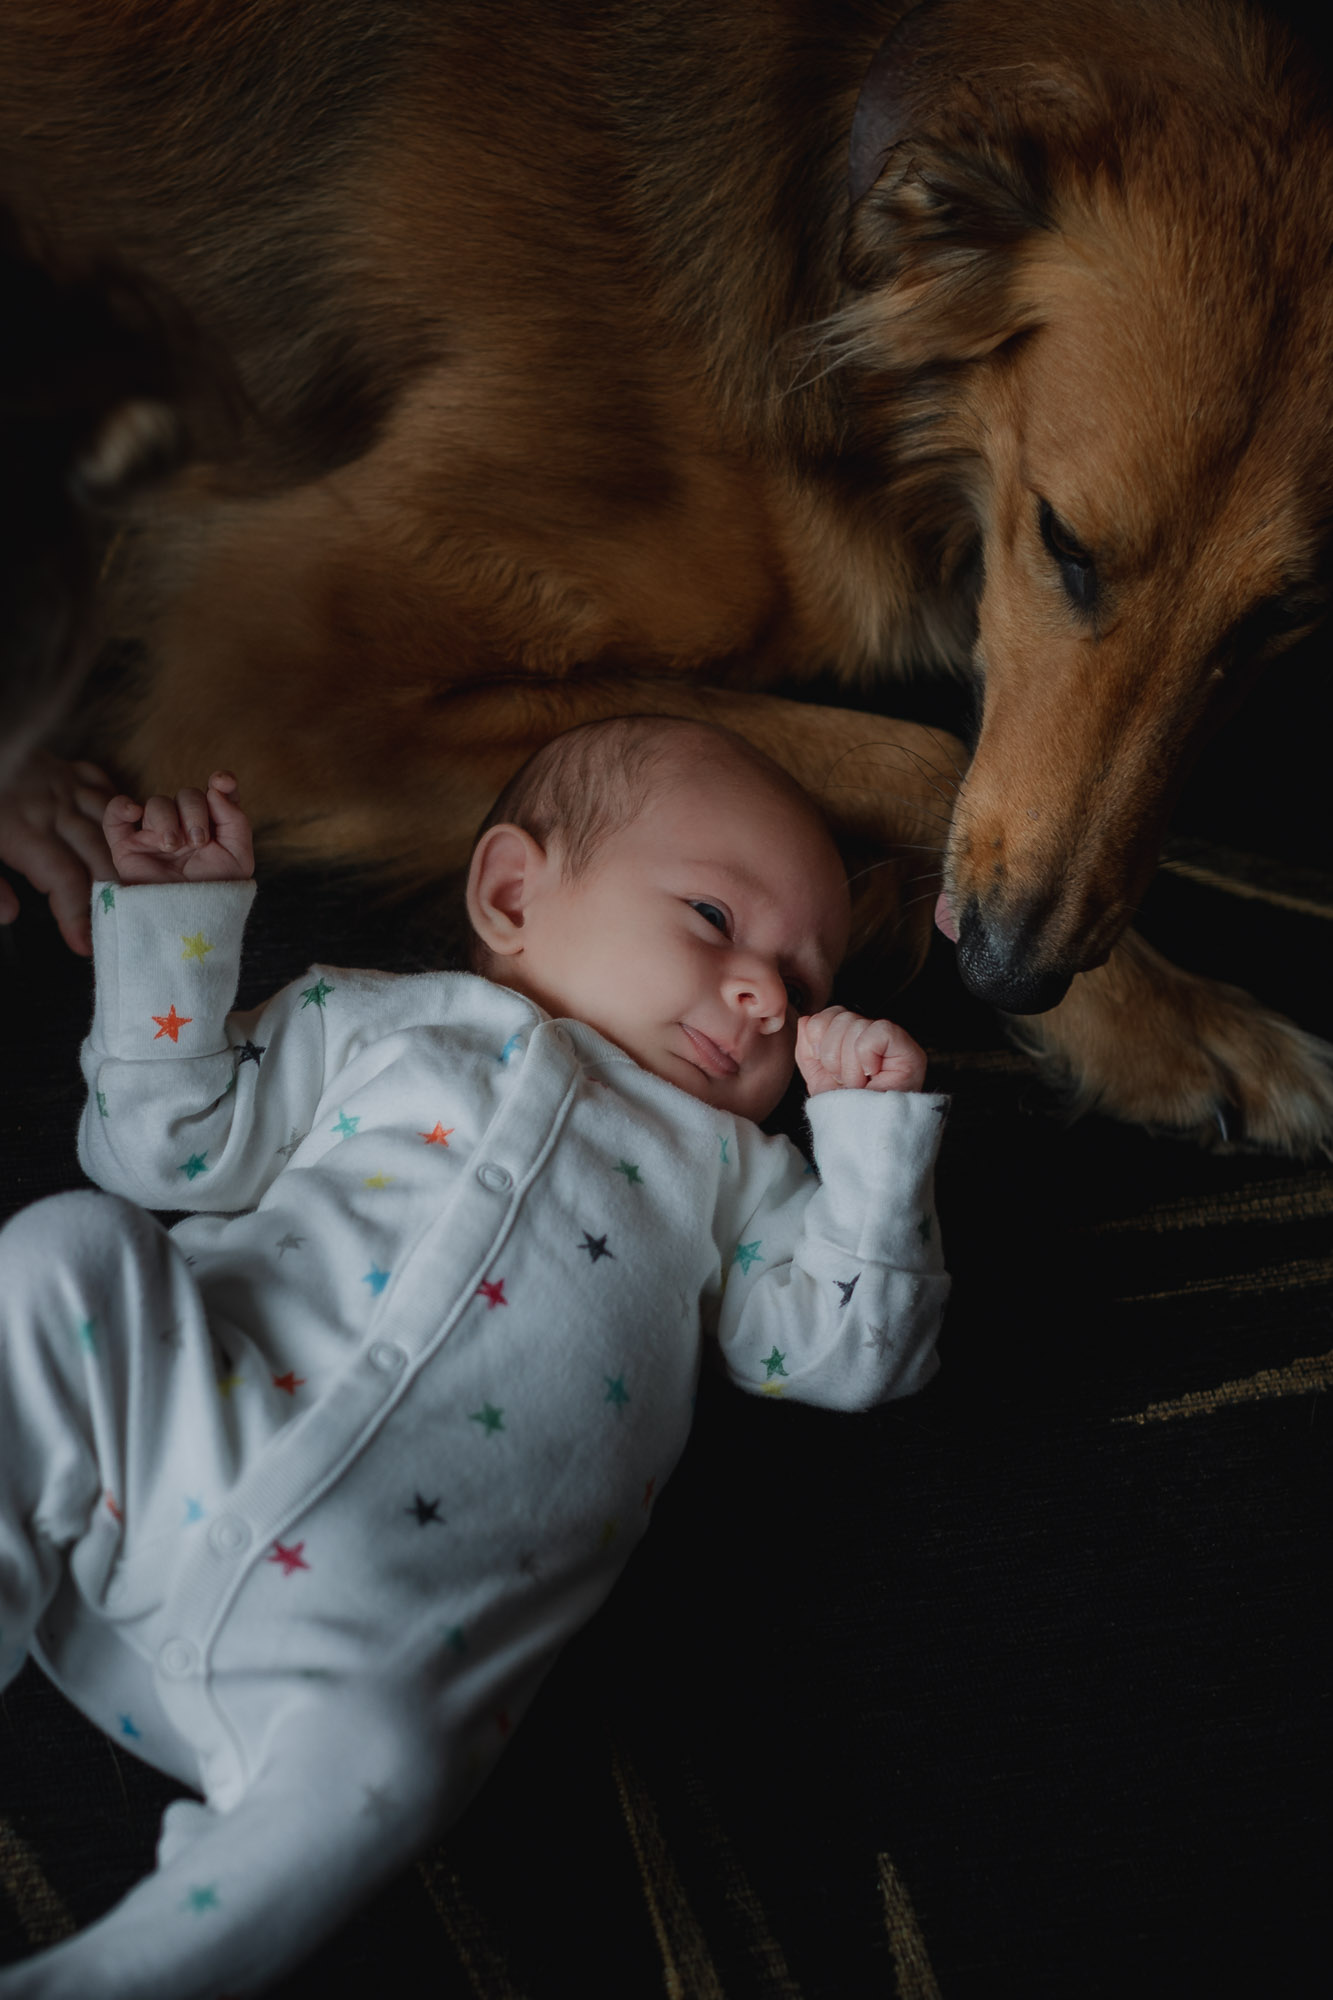 A brown lurcher dog curled around a newborn baby and reaching to lick her, on a lifestyle newborn photoshoot in a home in West Sussex.